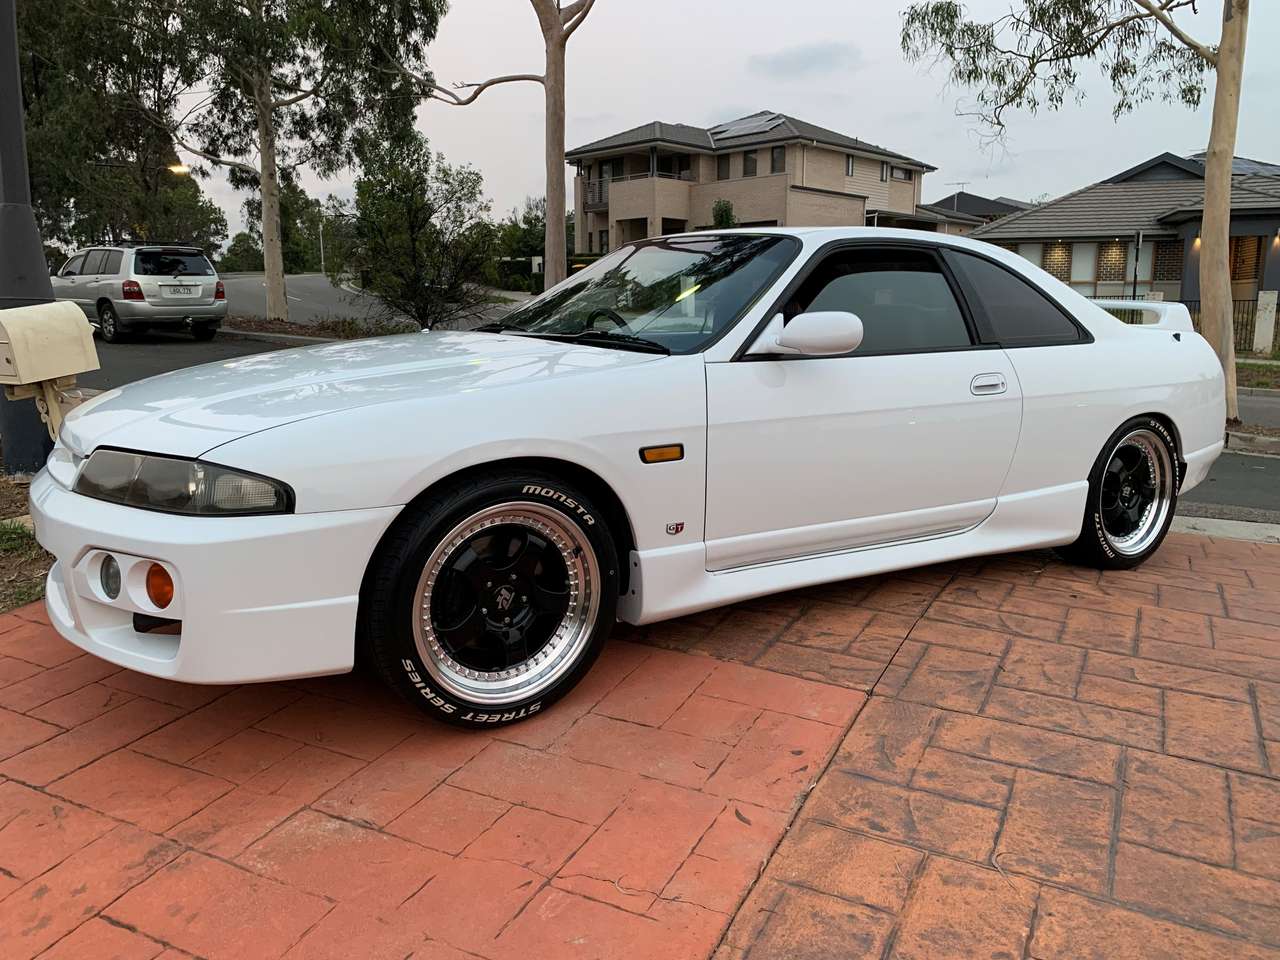 Skyline R33 puzzle online from photo